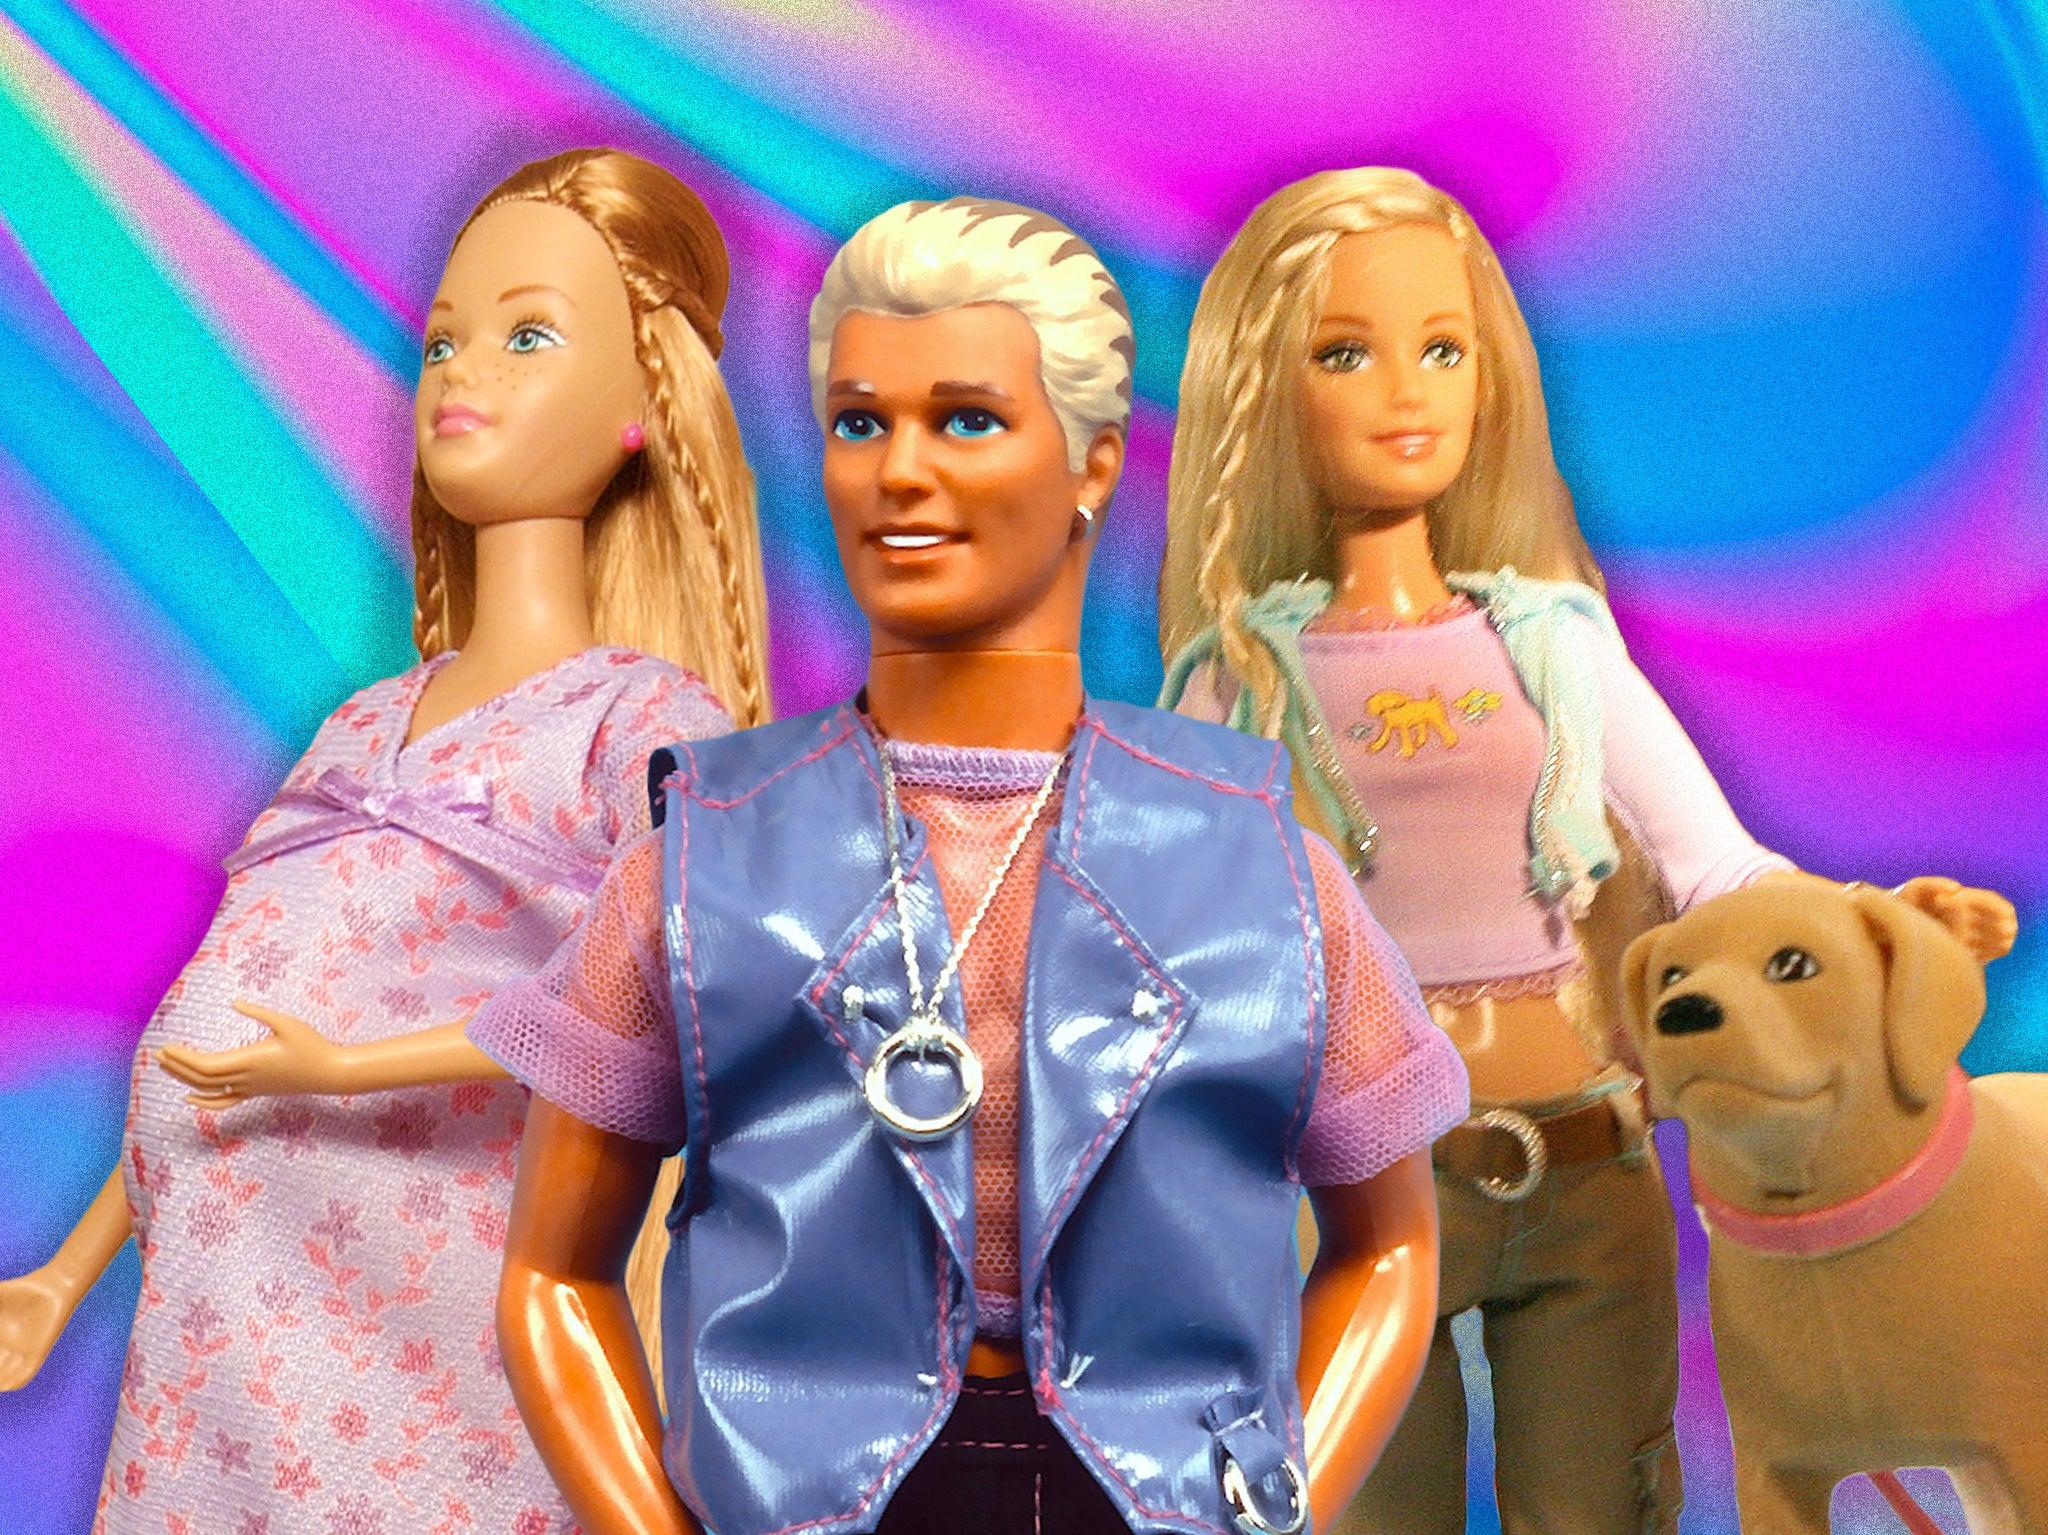 Barbie Doll Controversy The Toys Too Gay Weird And